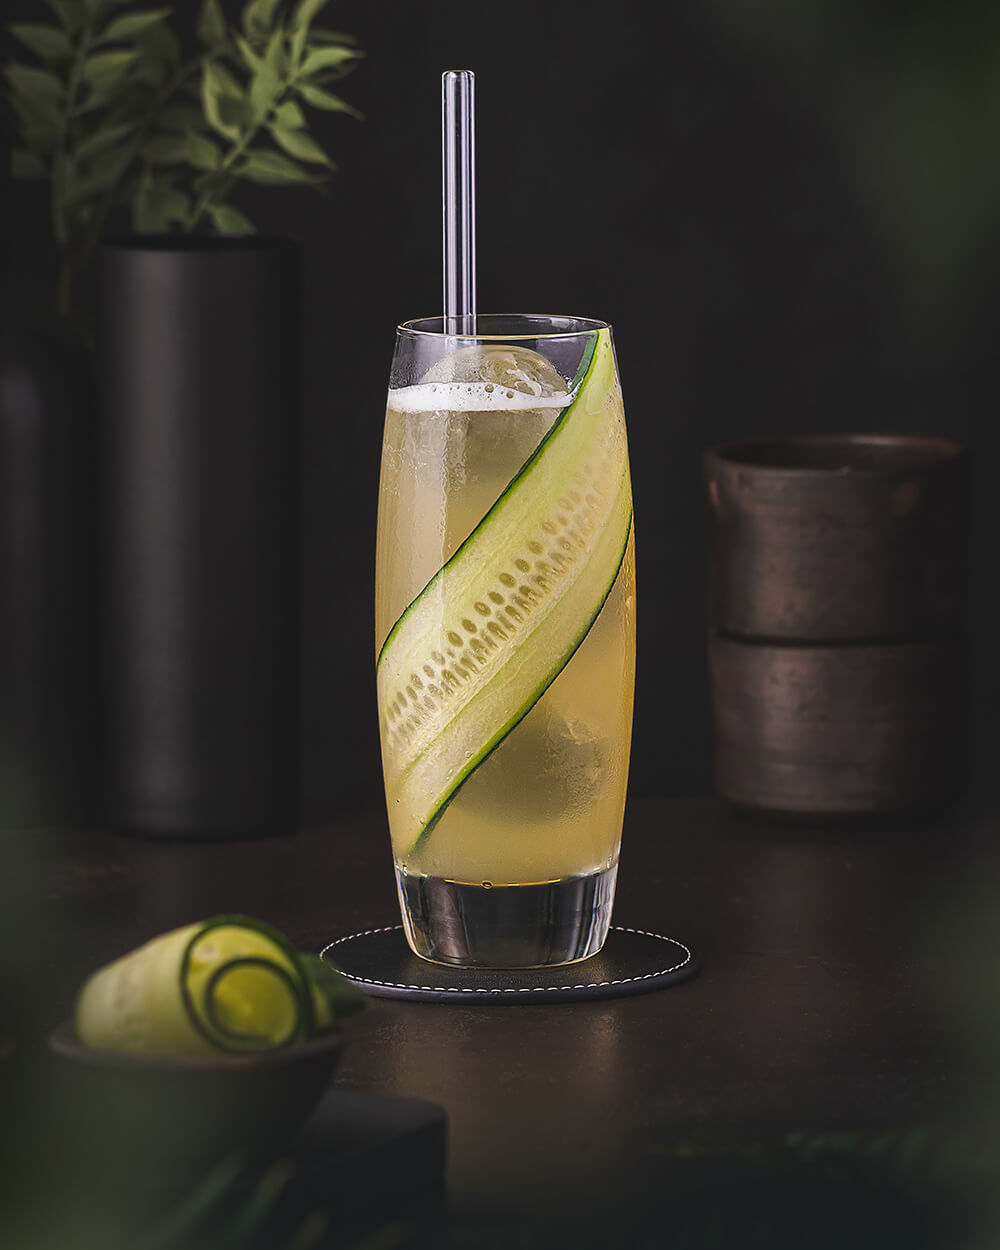 Le Gurk - Cocktail made with gin, Elderflower, apple juice and cucumber. Served in a highball glass garnished with a cucumber.